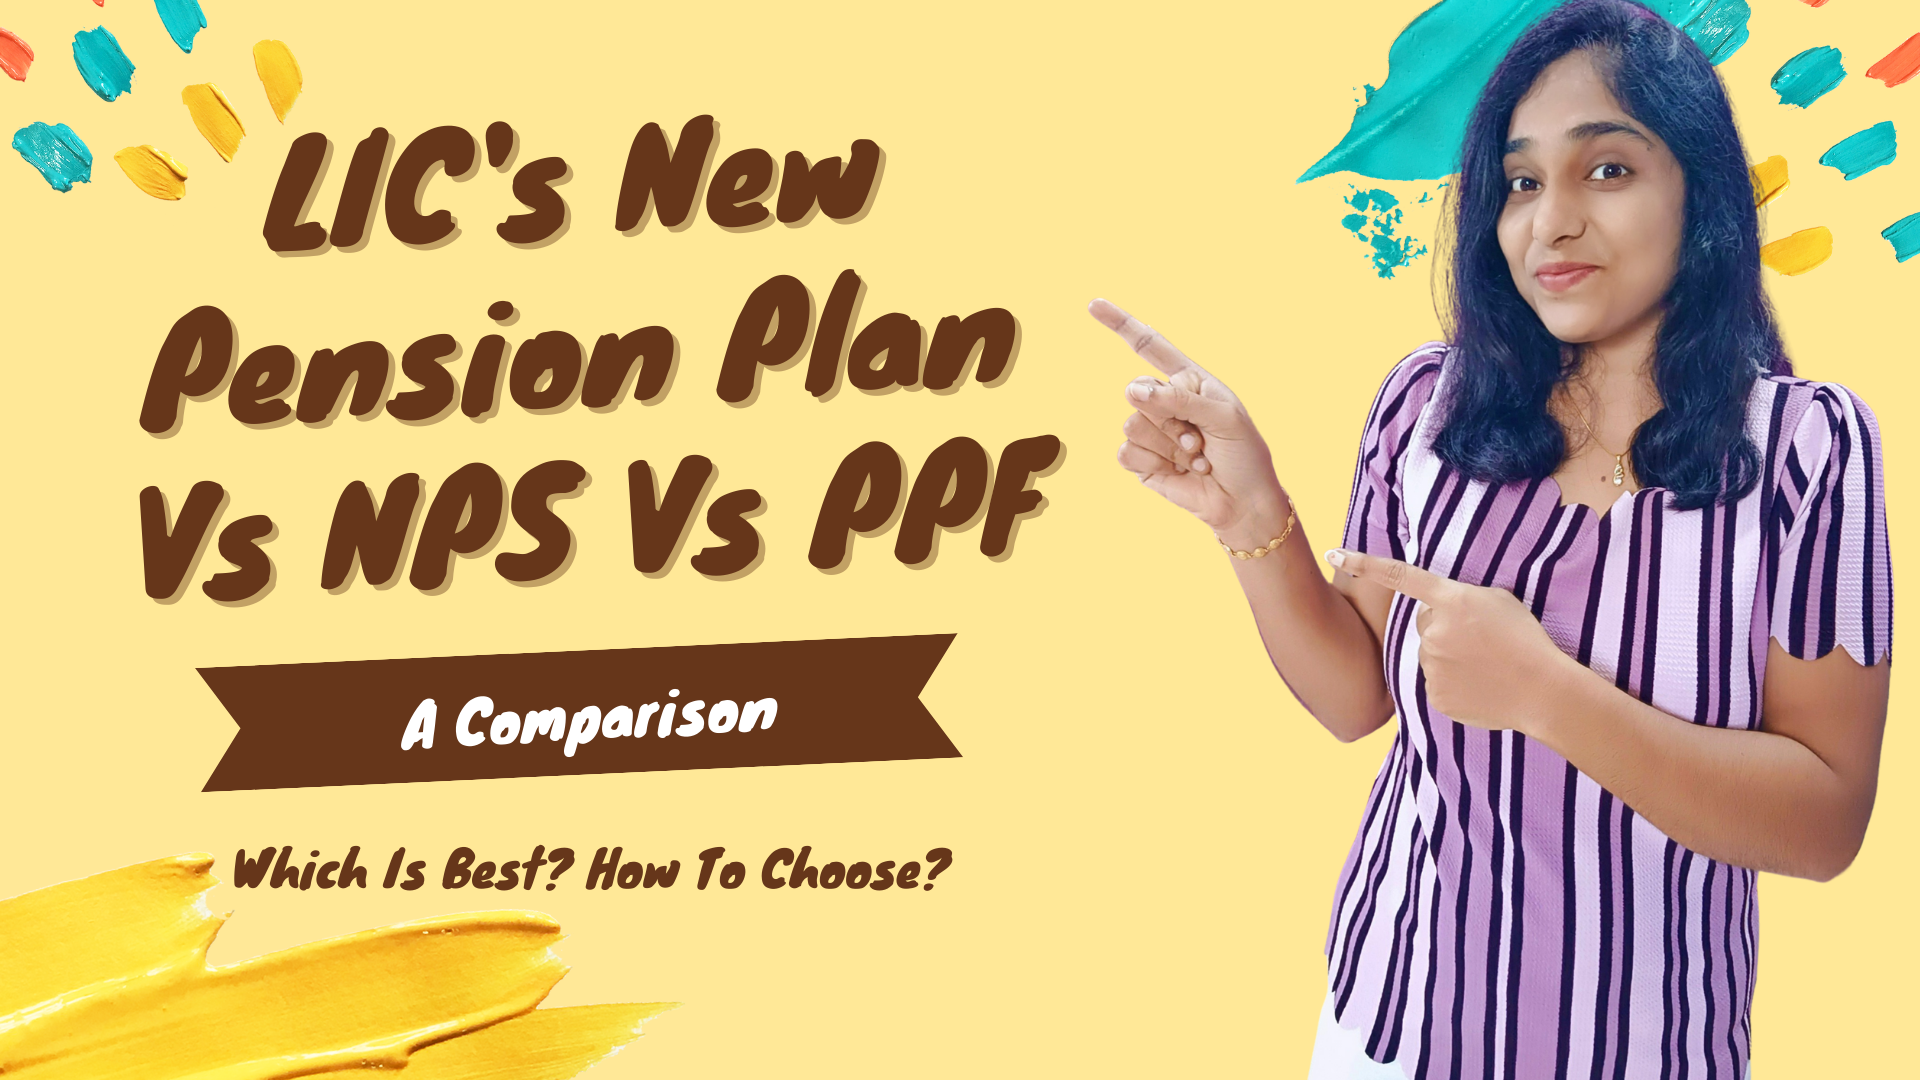 LIC's New Pension Plan Vs NPS Vs PPF - A Comparison Of The 3 Schemes | Which Is Best? How To Choose?